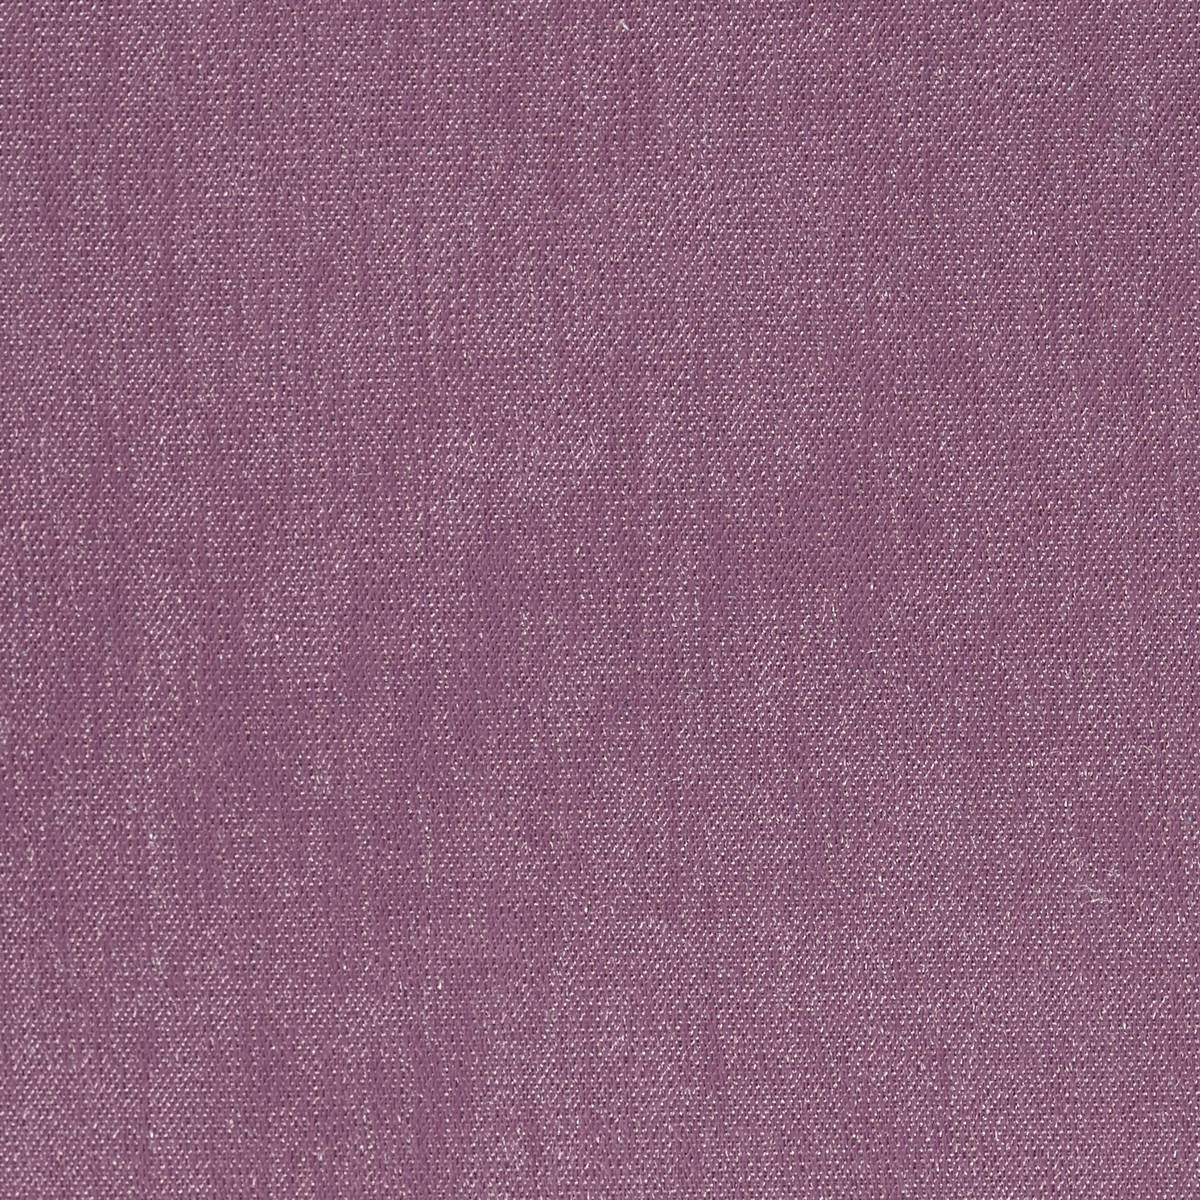 Spectro Orchid Fabric by Harlequin